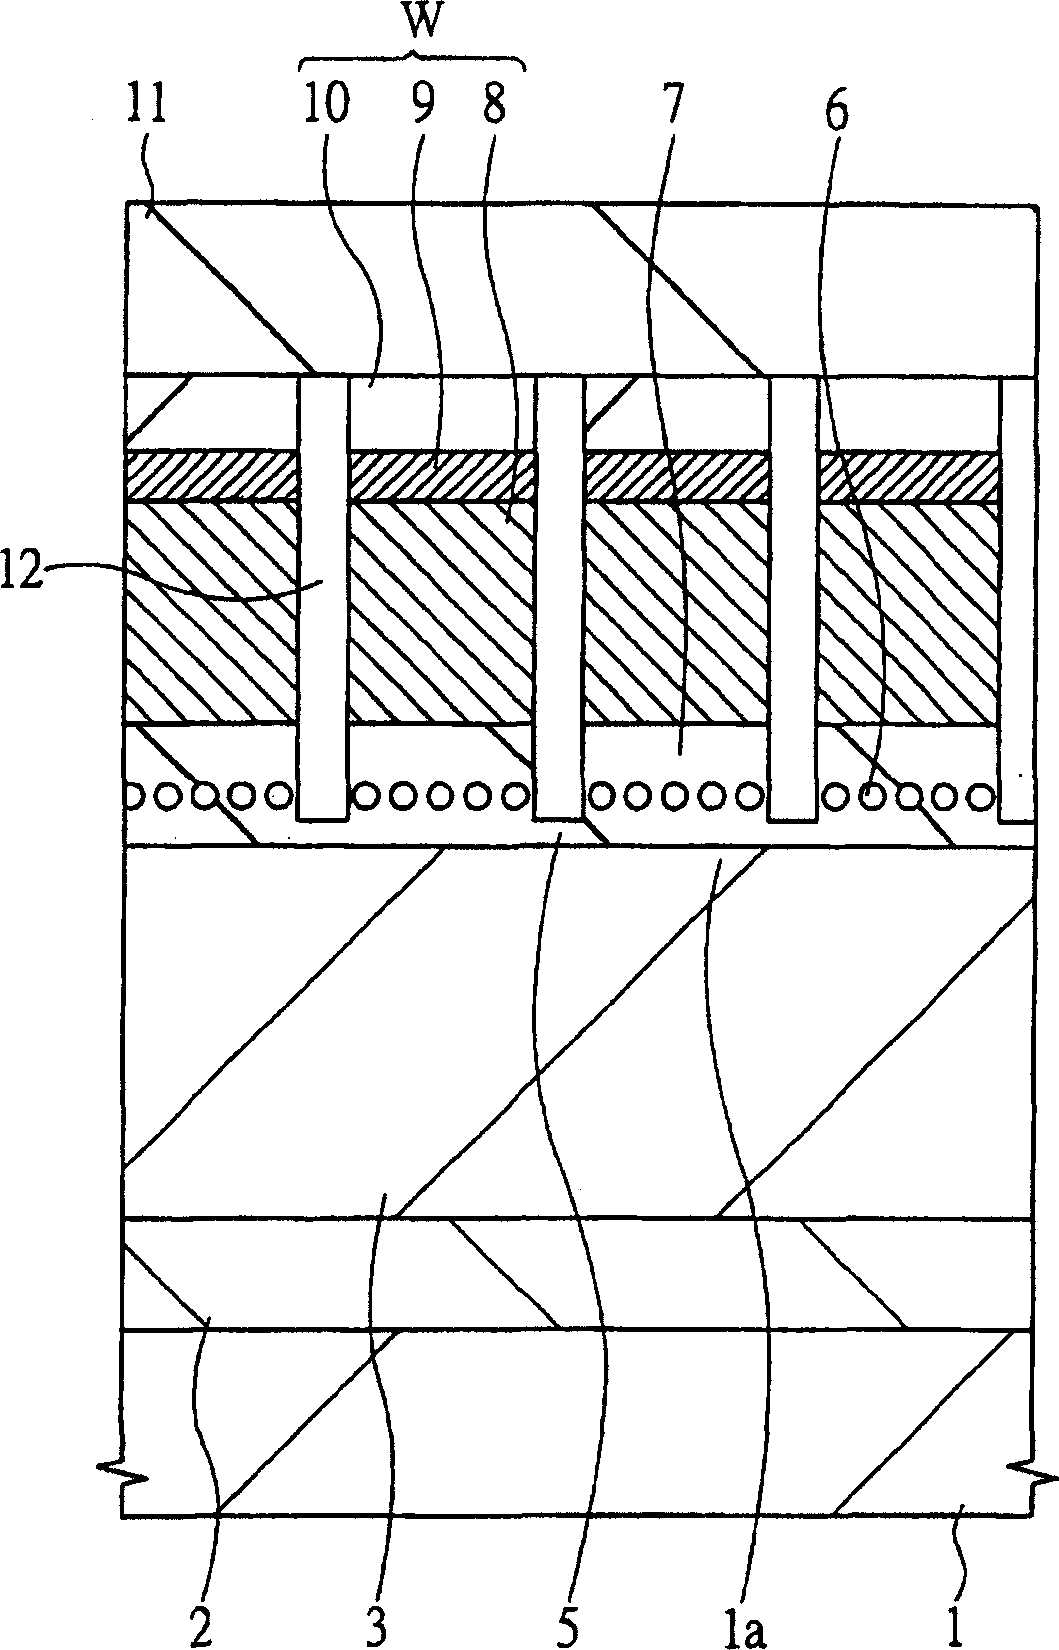 Semiconductor memory device and method for making same